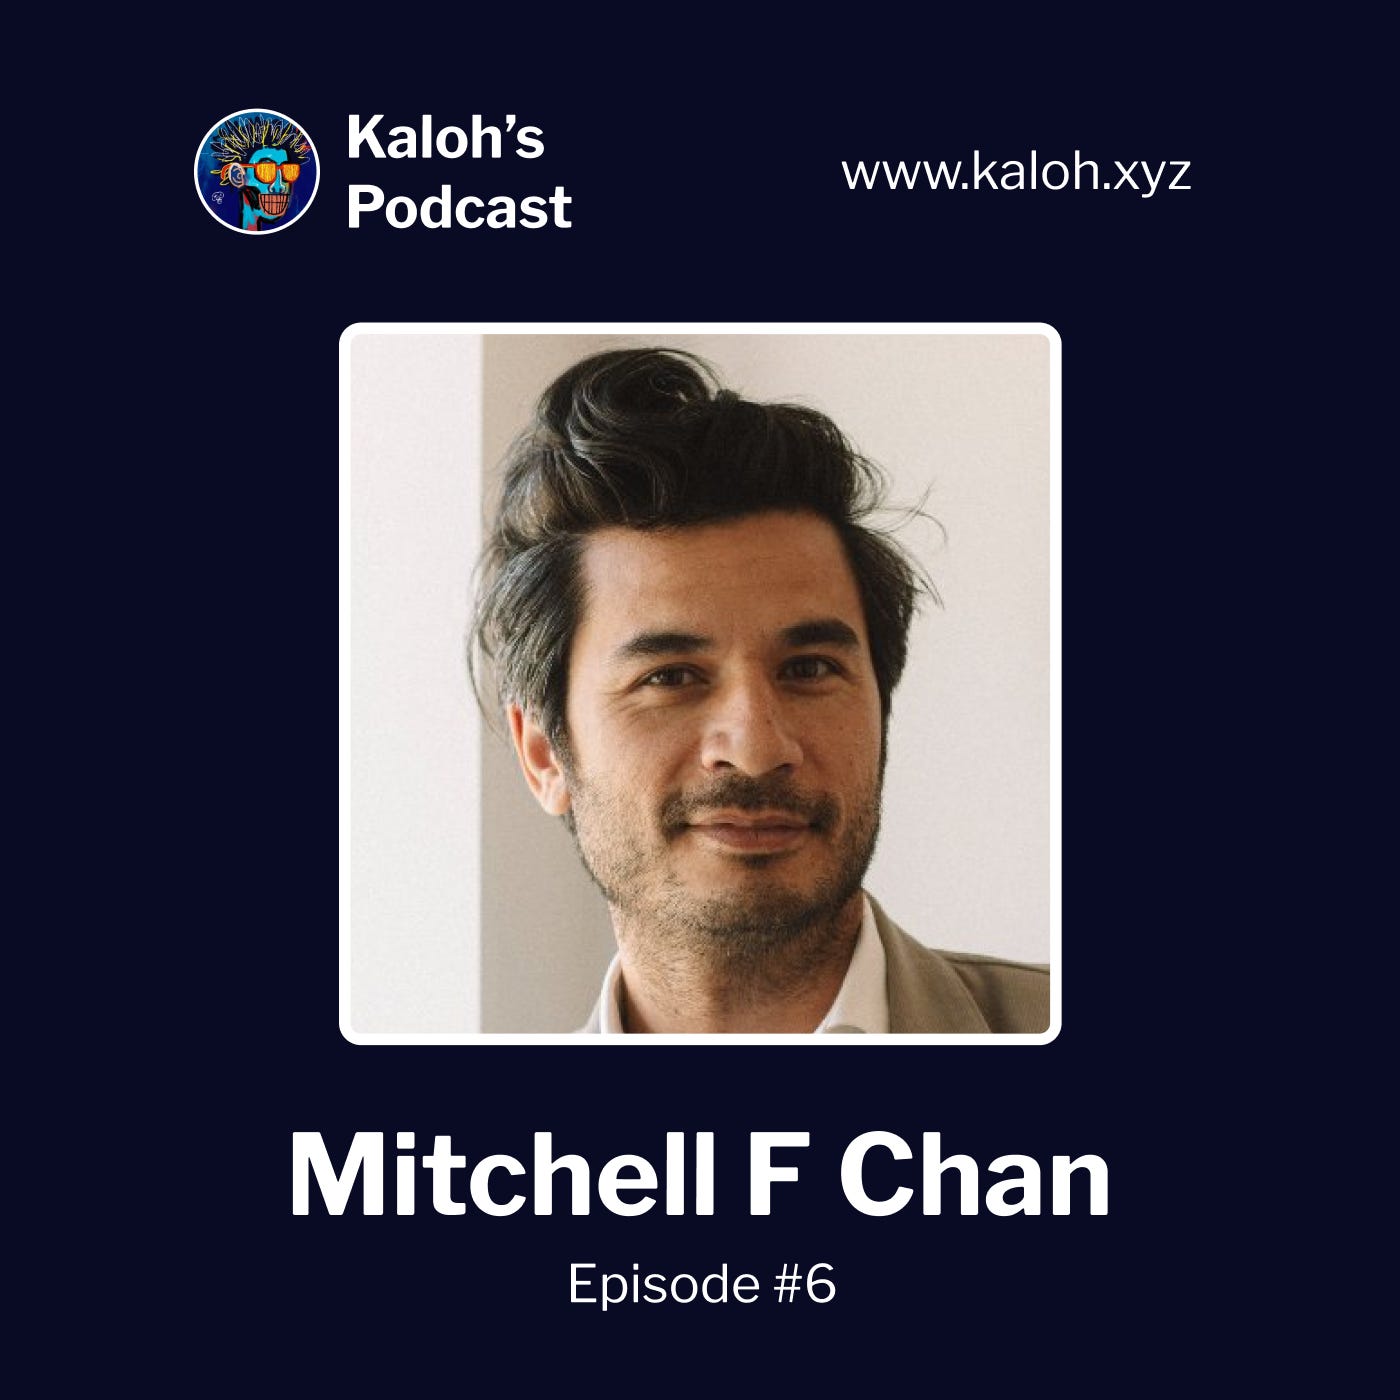 Kaloh’s Podcast Episode #6: Mitchell F. Chan, digital artist, creator of The Boys of Summer and Digital Zones of Immaterial Pictorial Sensibility.